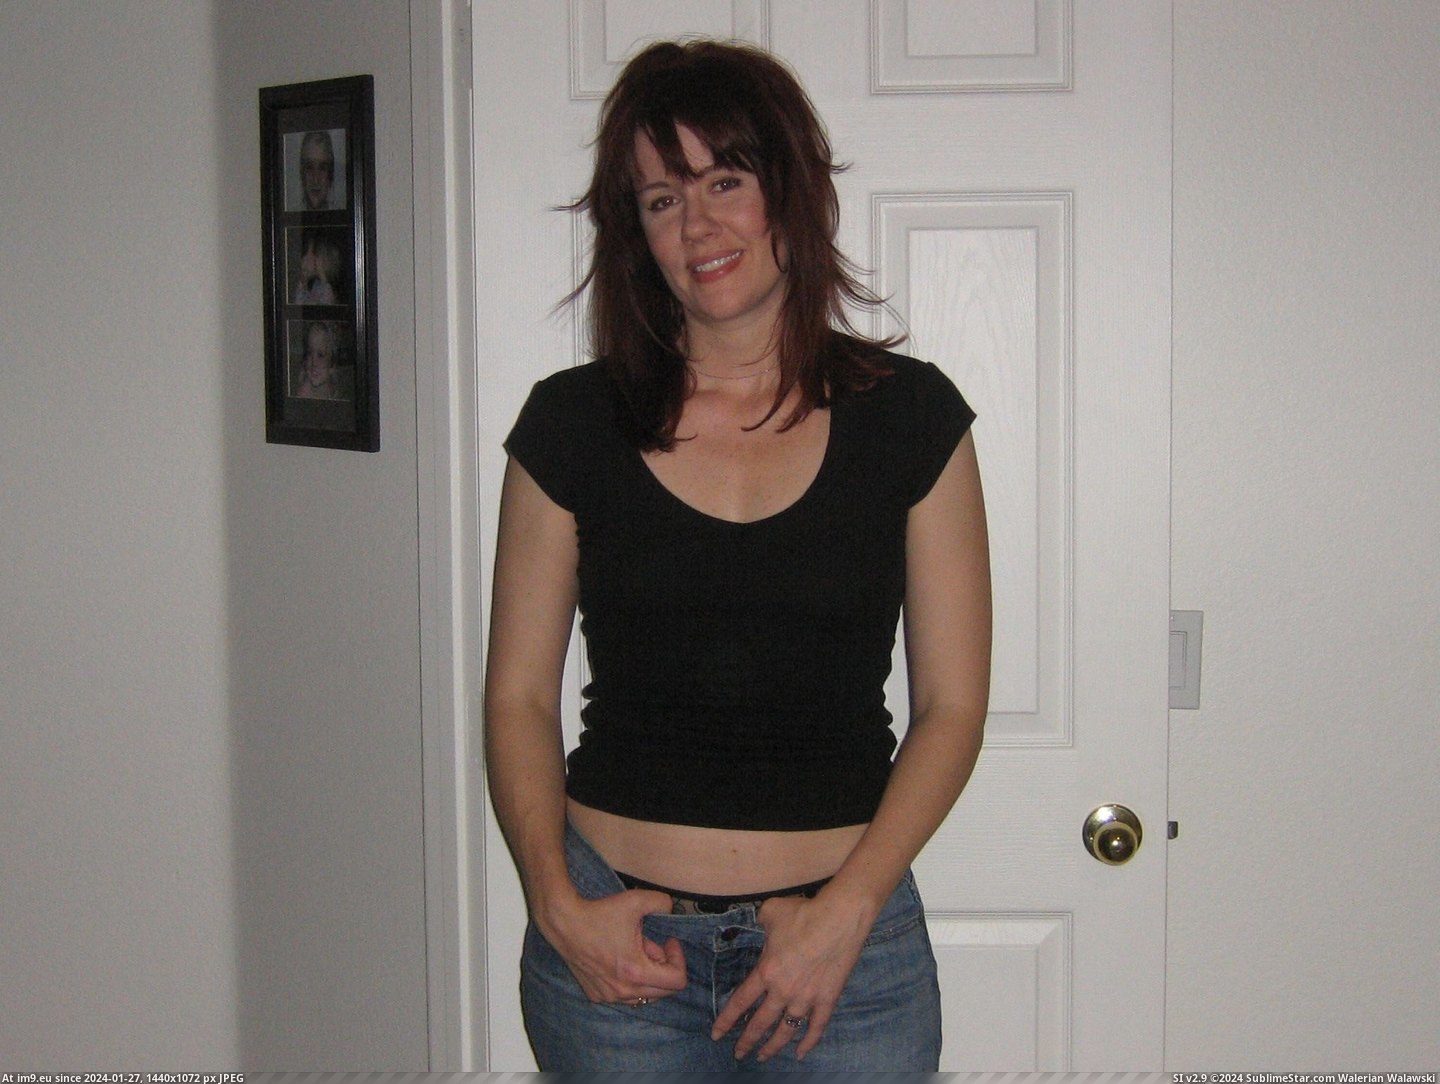 #Exposed  #Lisa Lisa exposed (115) Pic. (Image of album exposed wife 0))